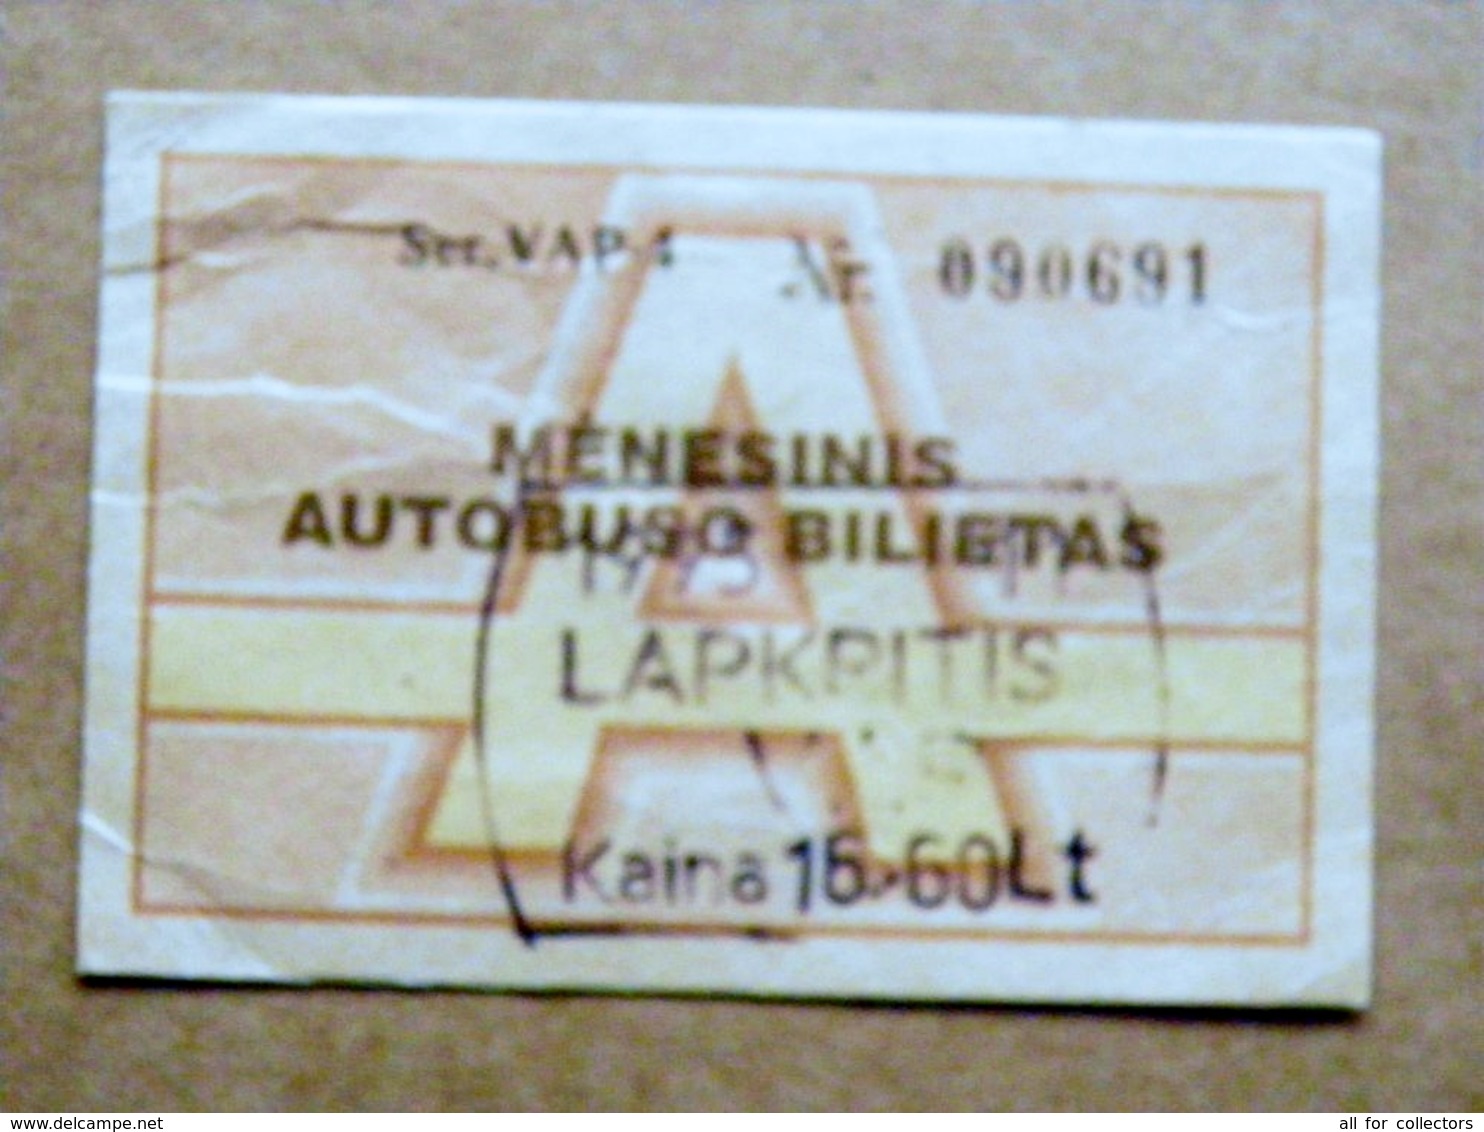 Transport Ticket Vilnius City Capital Of Lithuania BUS Monthly Ticket 1995 Year November 16,6lt - Europe